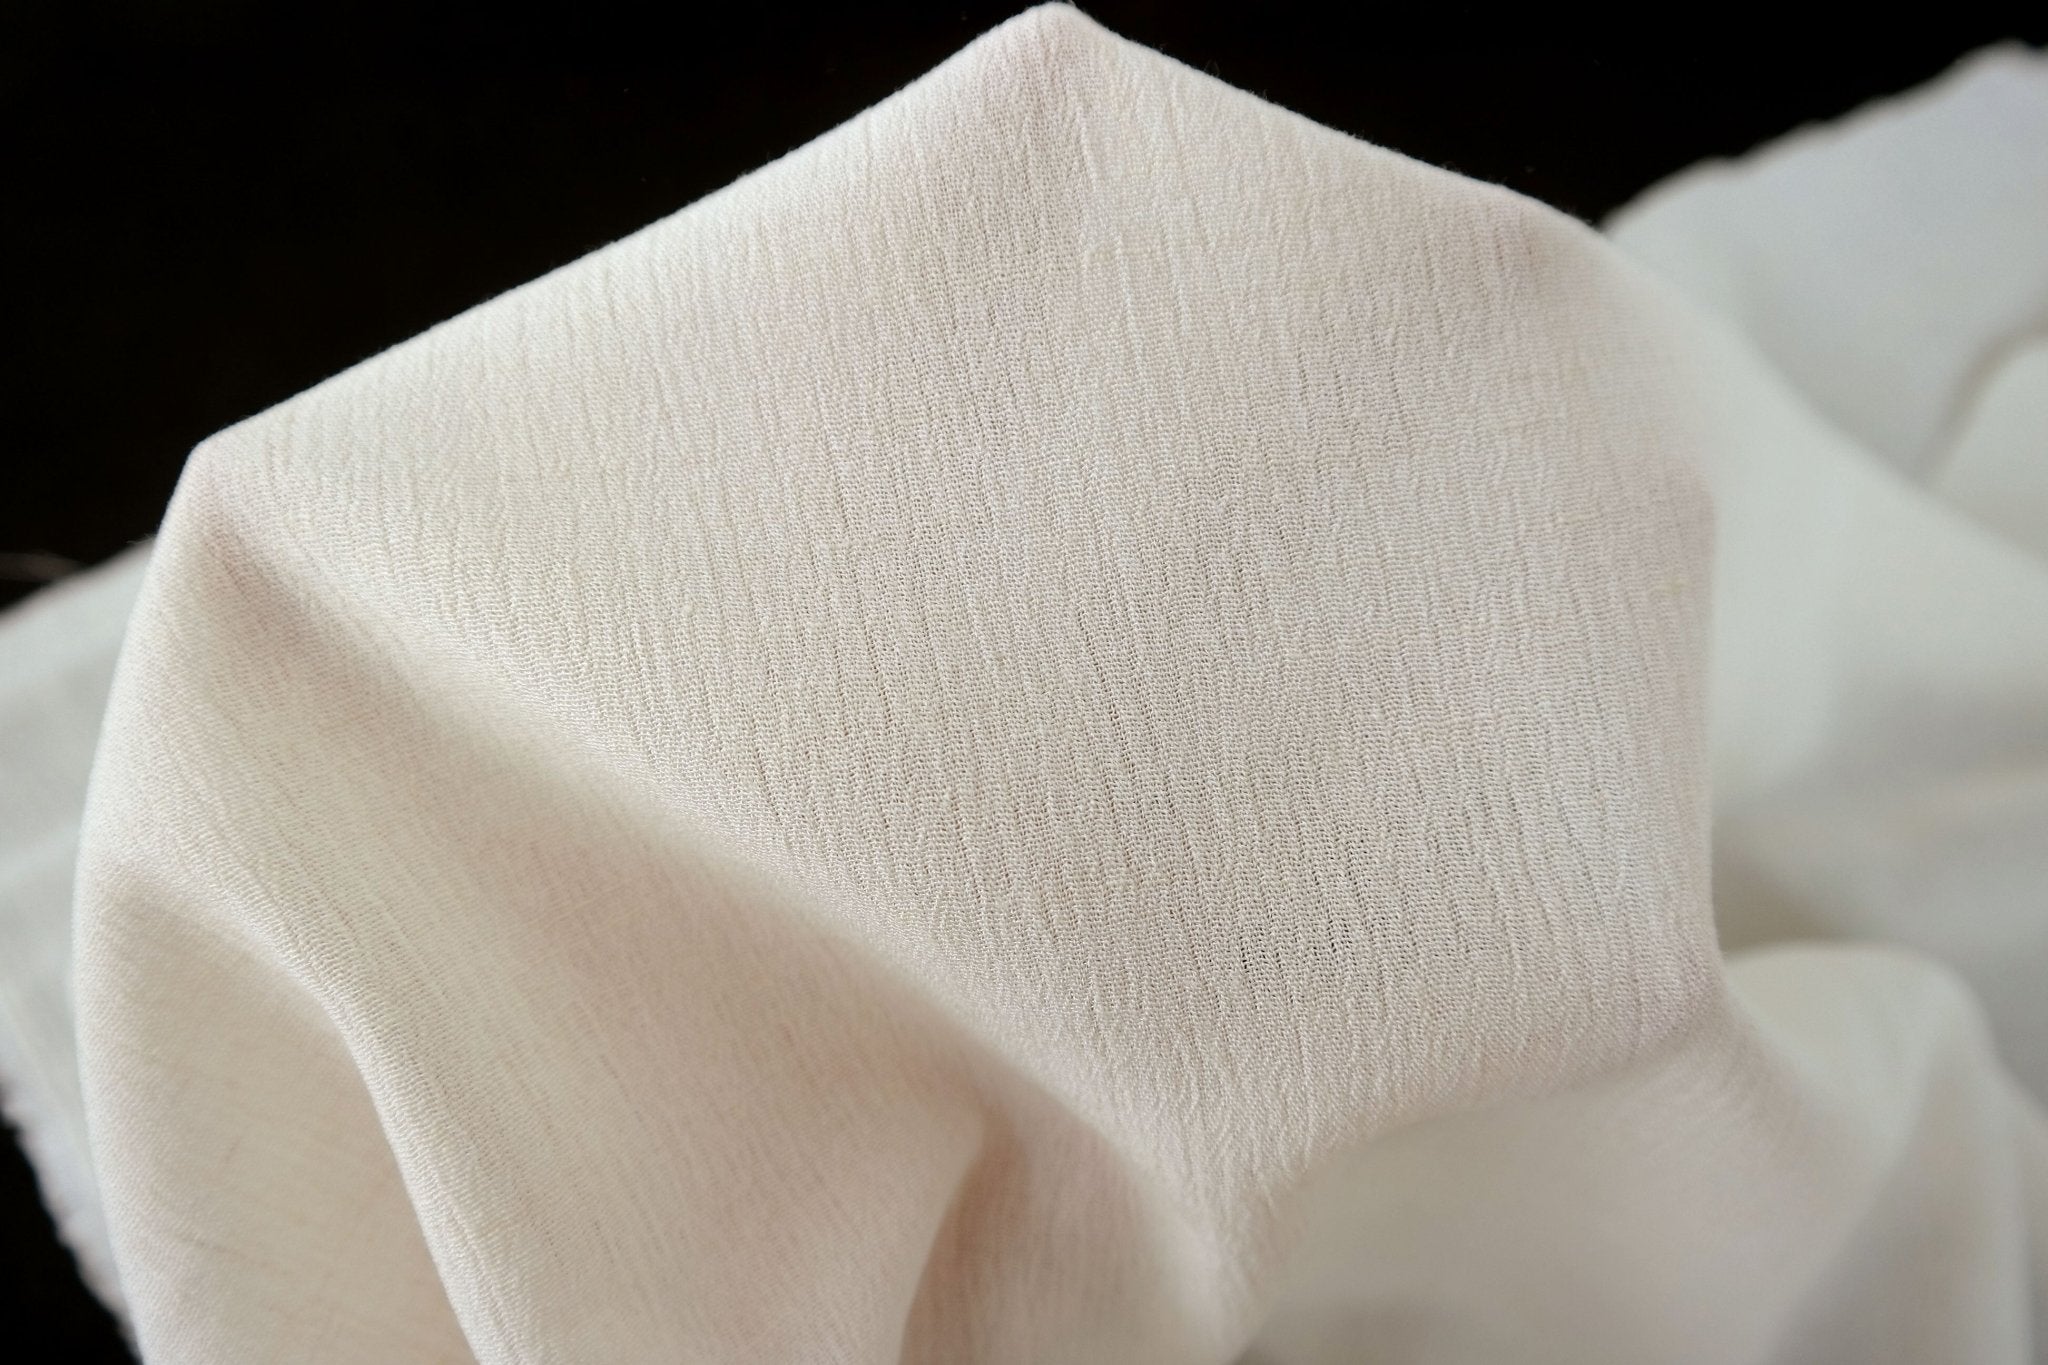 Linen Rayon 30s Wrinkled Fabric - The Linen Lab - Ivory